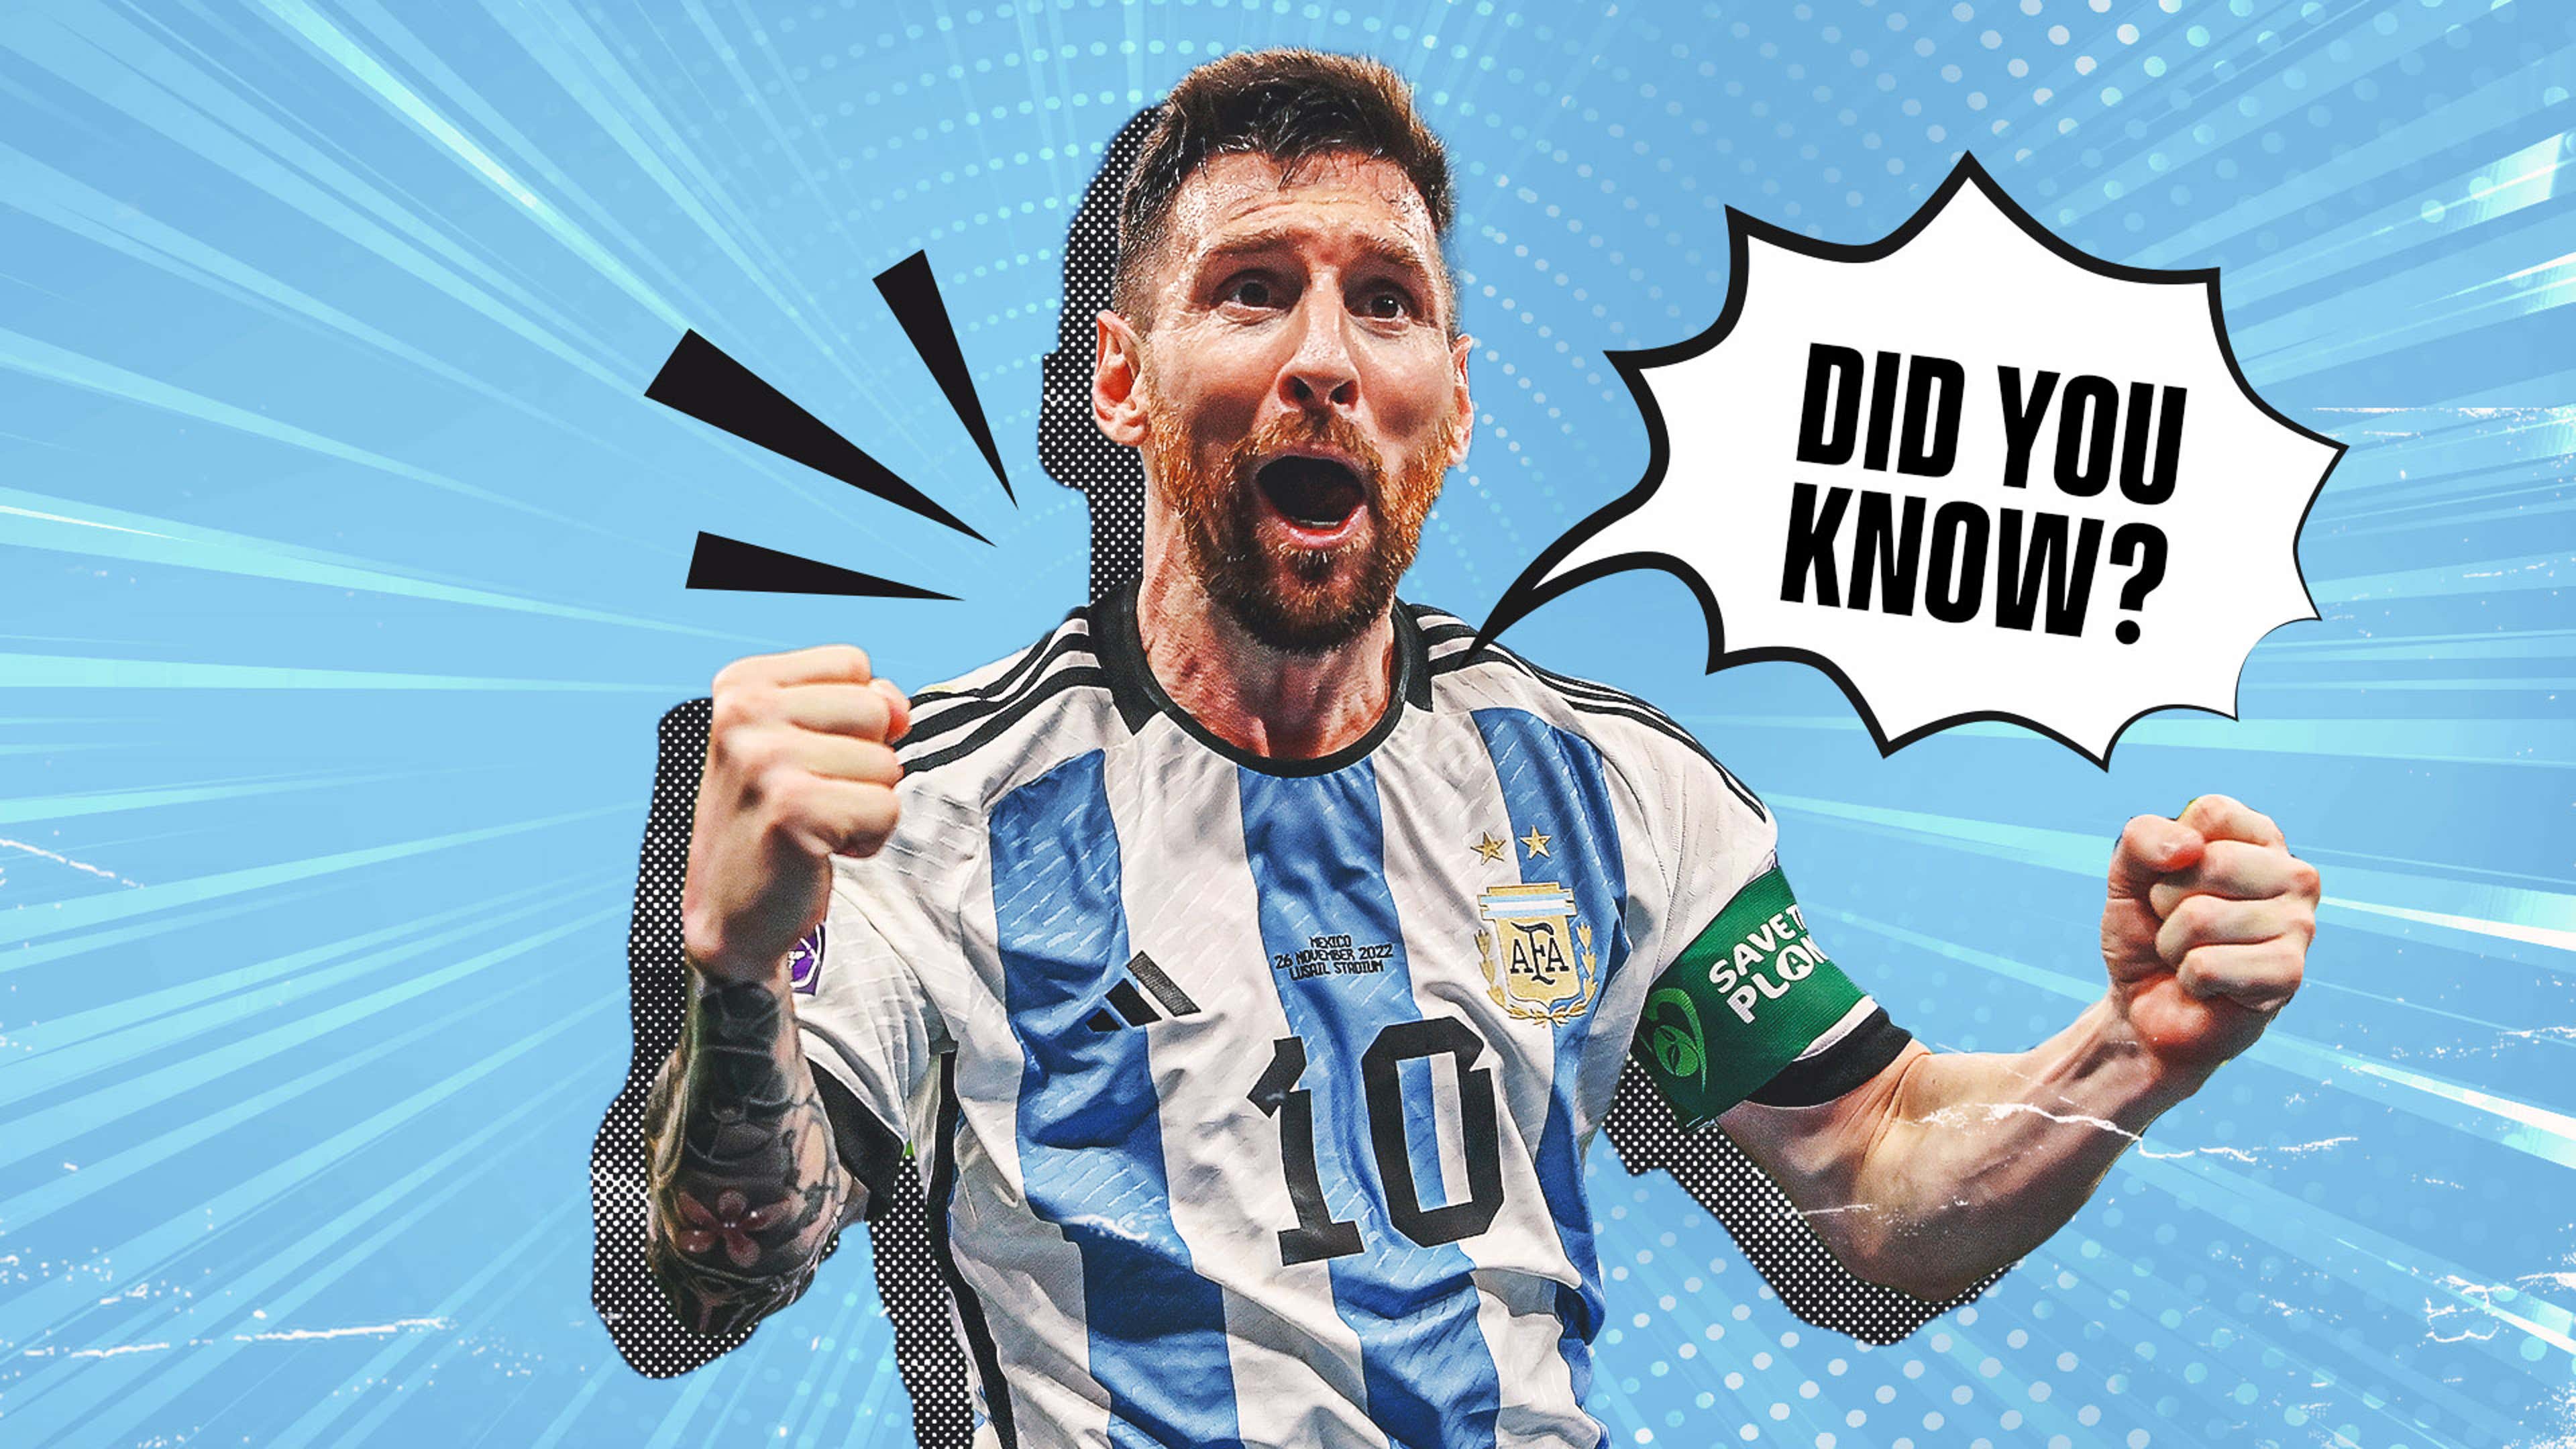 Fans look for clues to reveal the true GOAT as Lionel Messi and